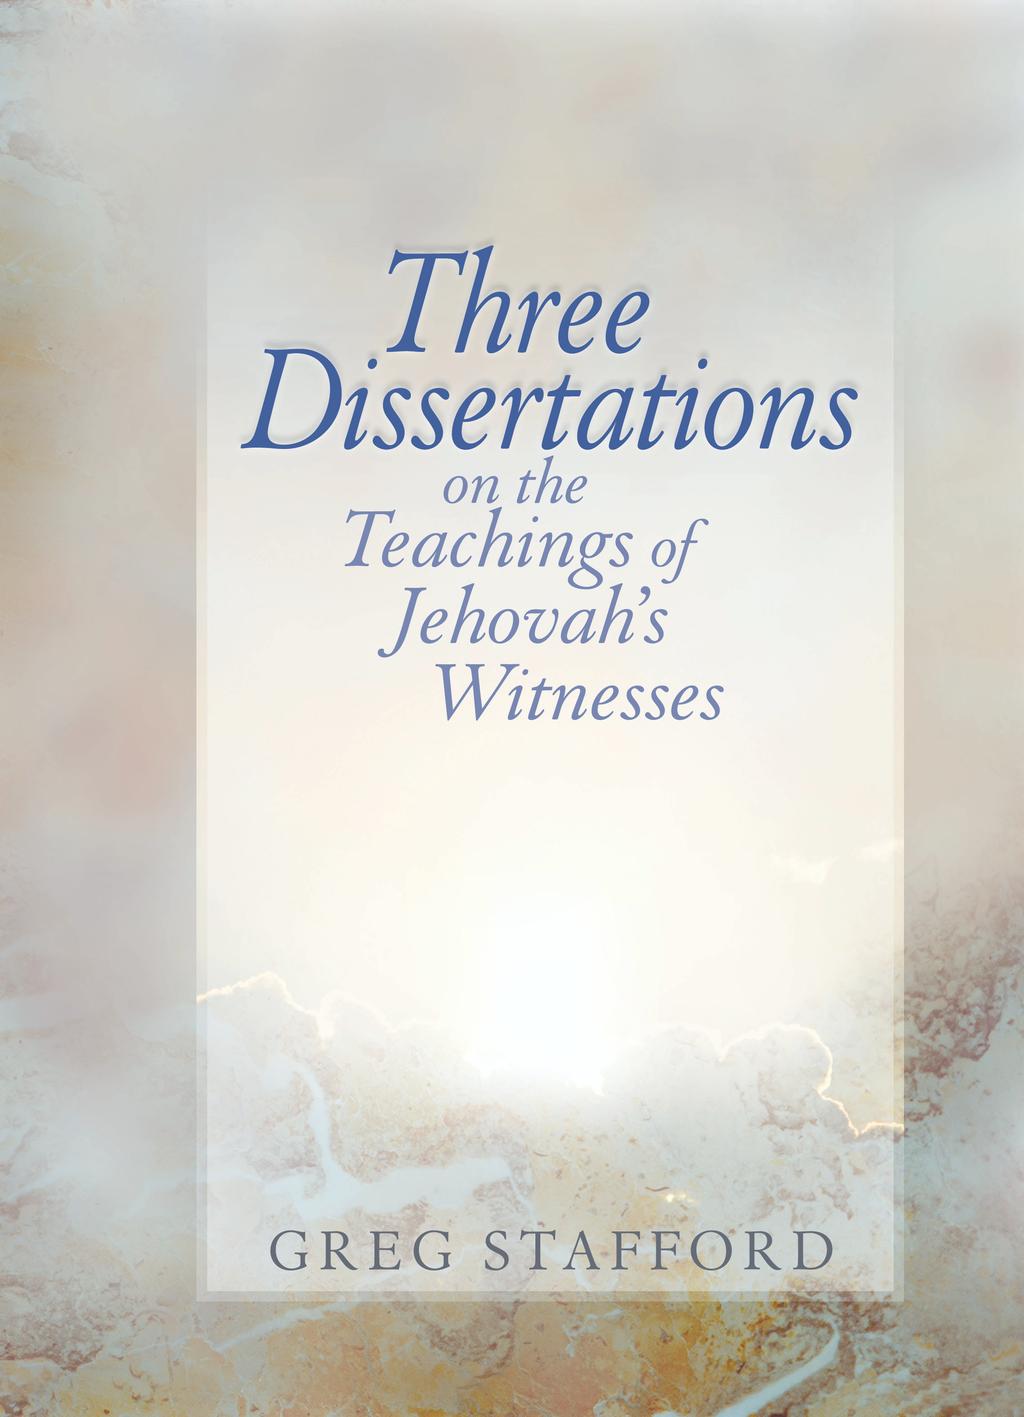 RELIGION IMPORTANT ASSESSMENT of three central and related topics concerning Jehovah s Witnesses and the Watchtower Bible and Tract Society in the form of three dissertations.